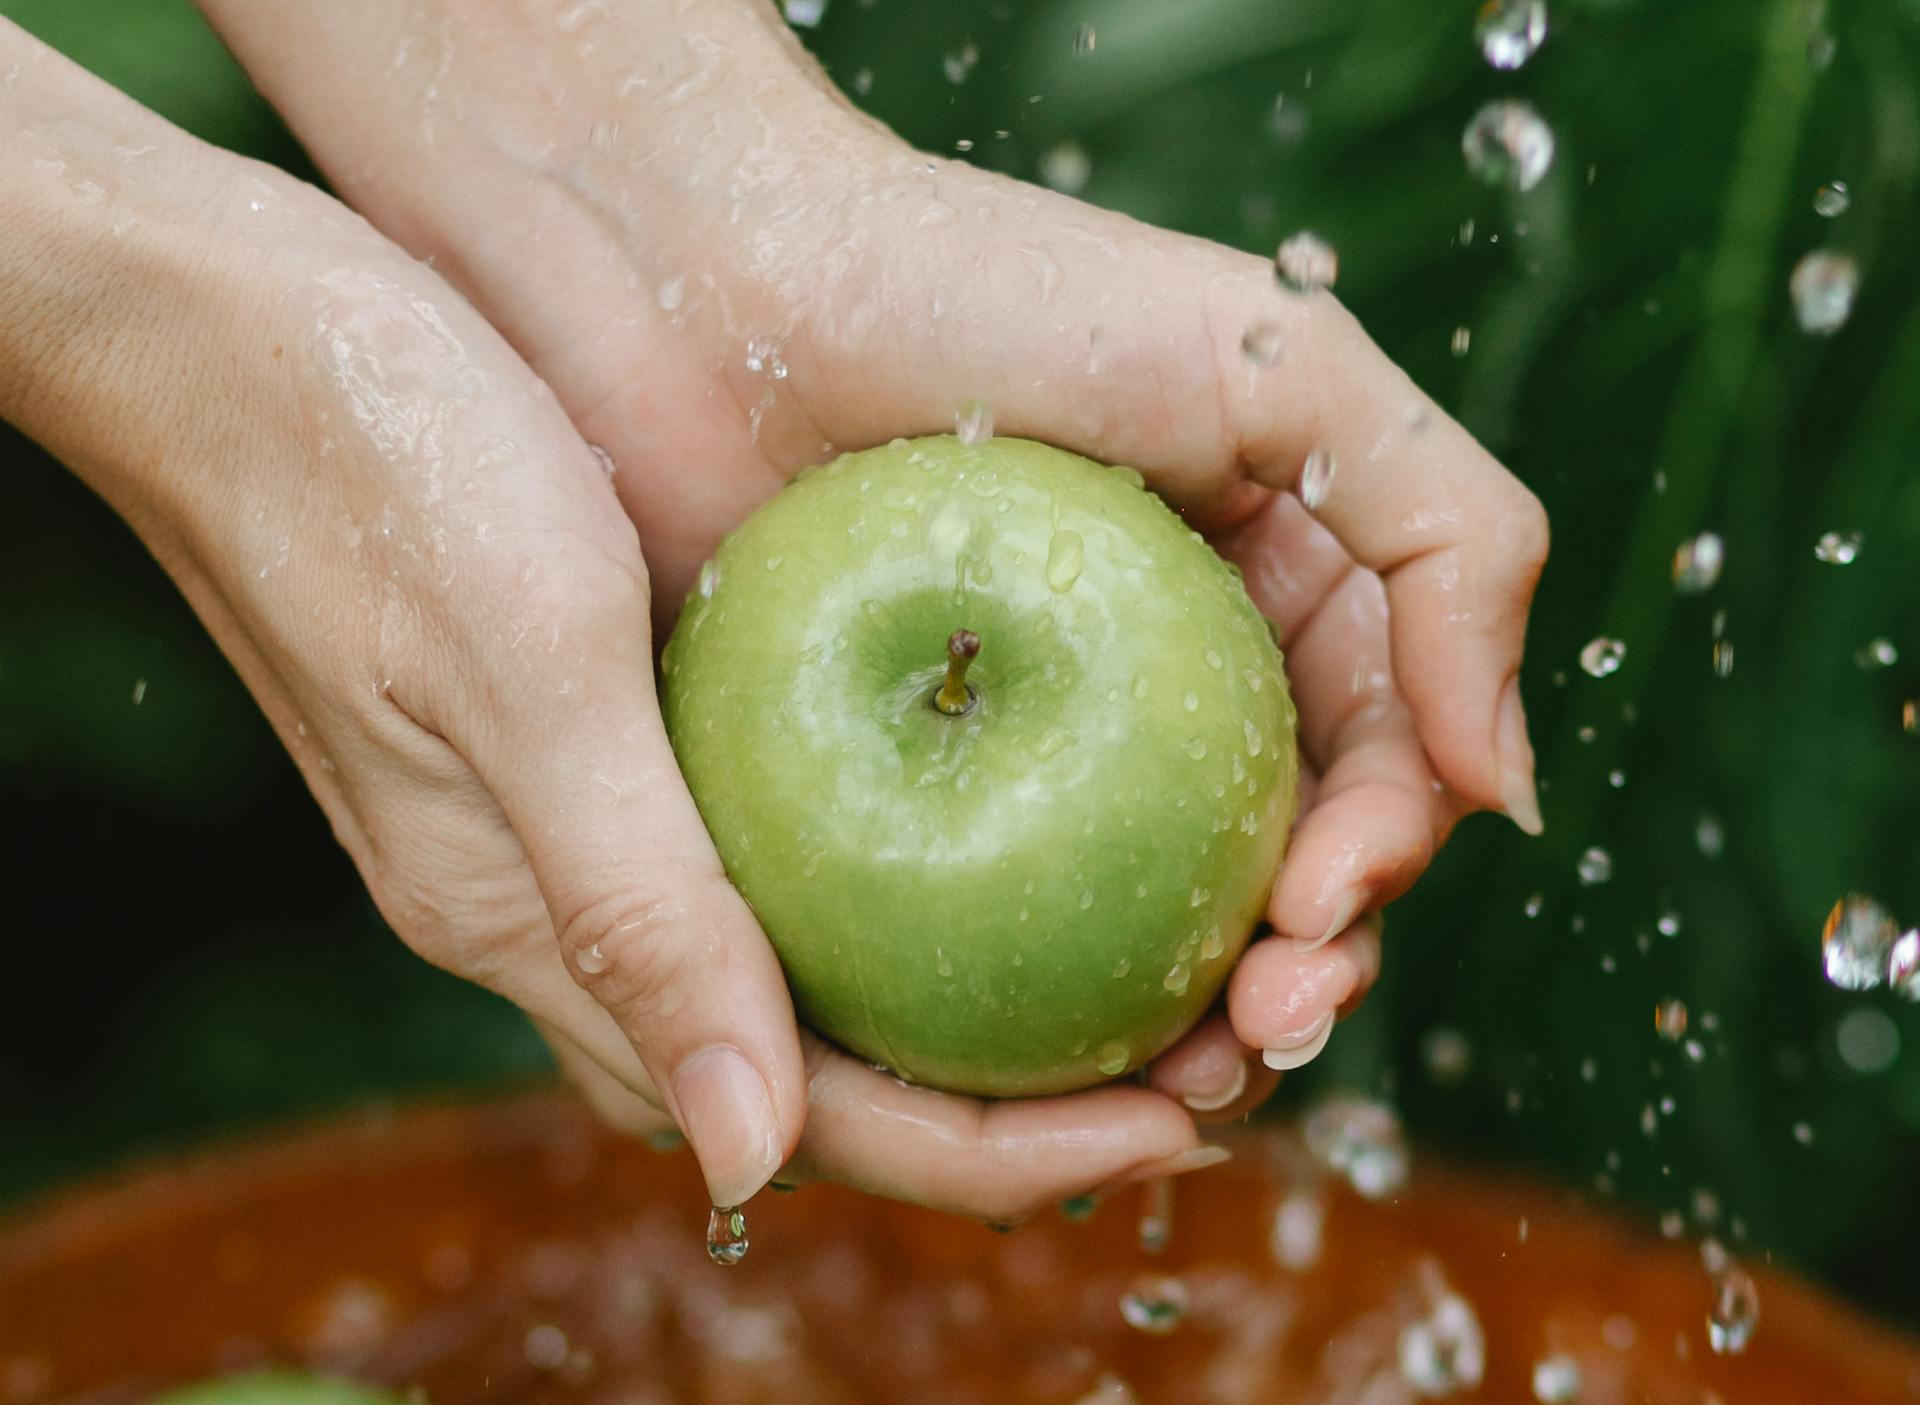 Crop anonymous woman washing green apples in wooden bowl